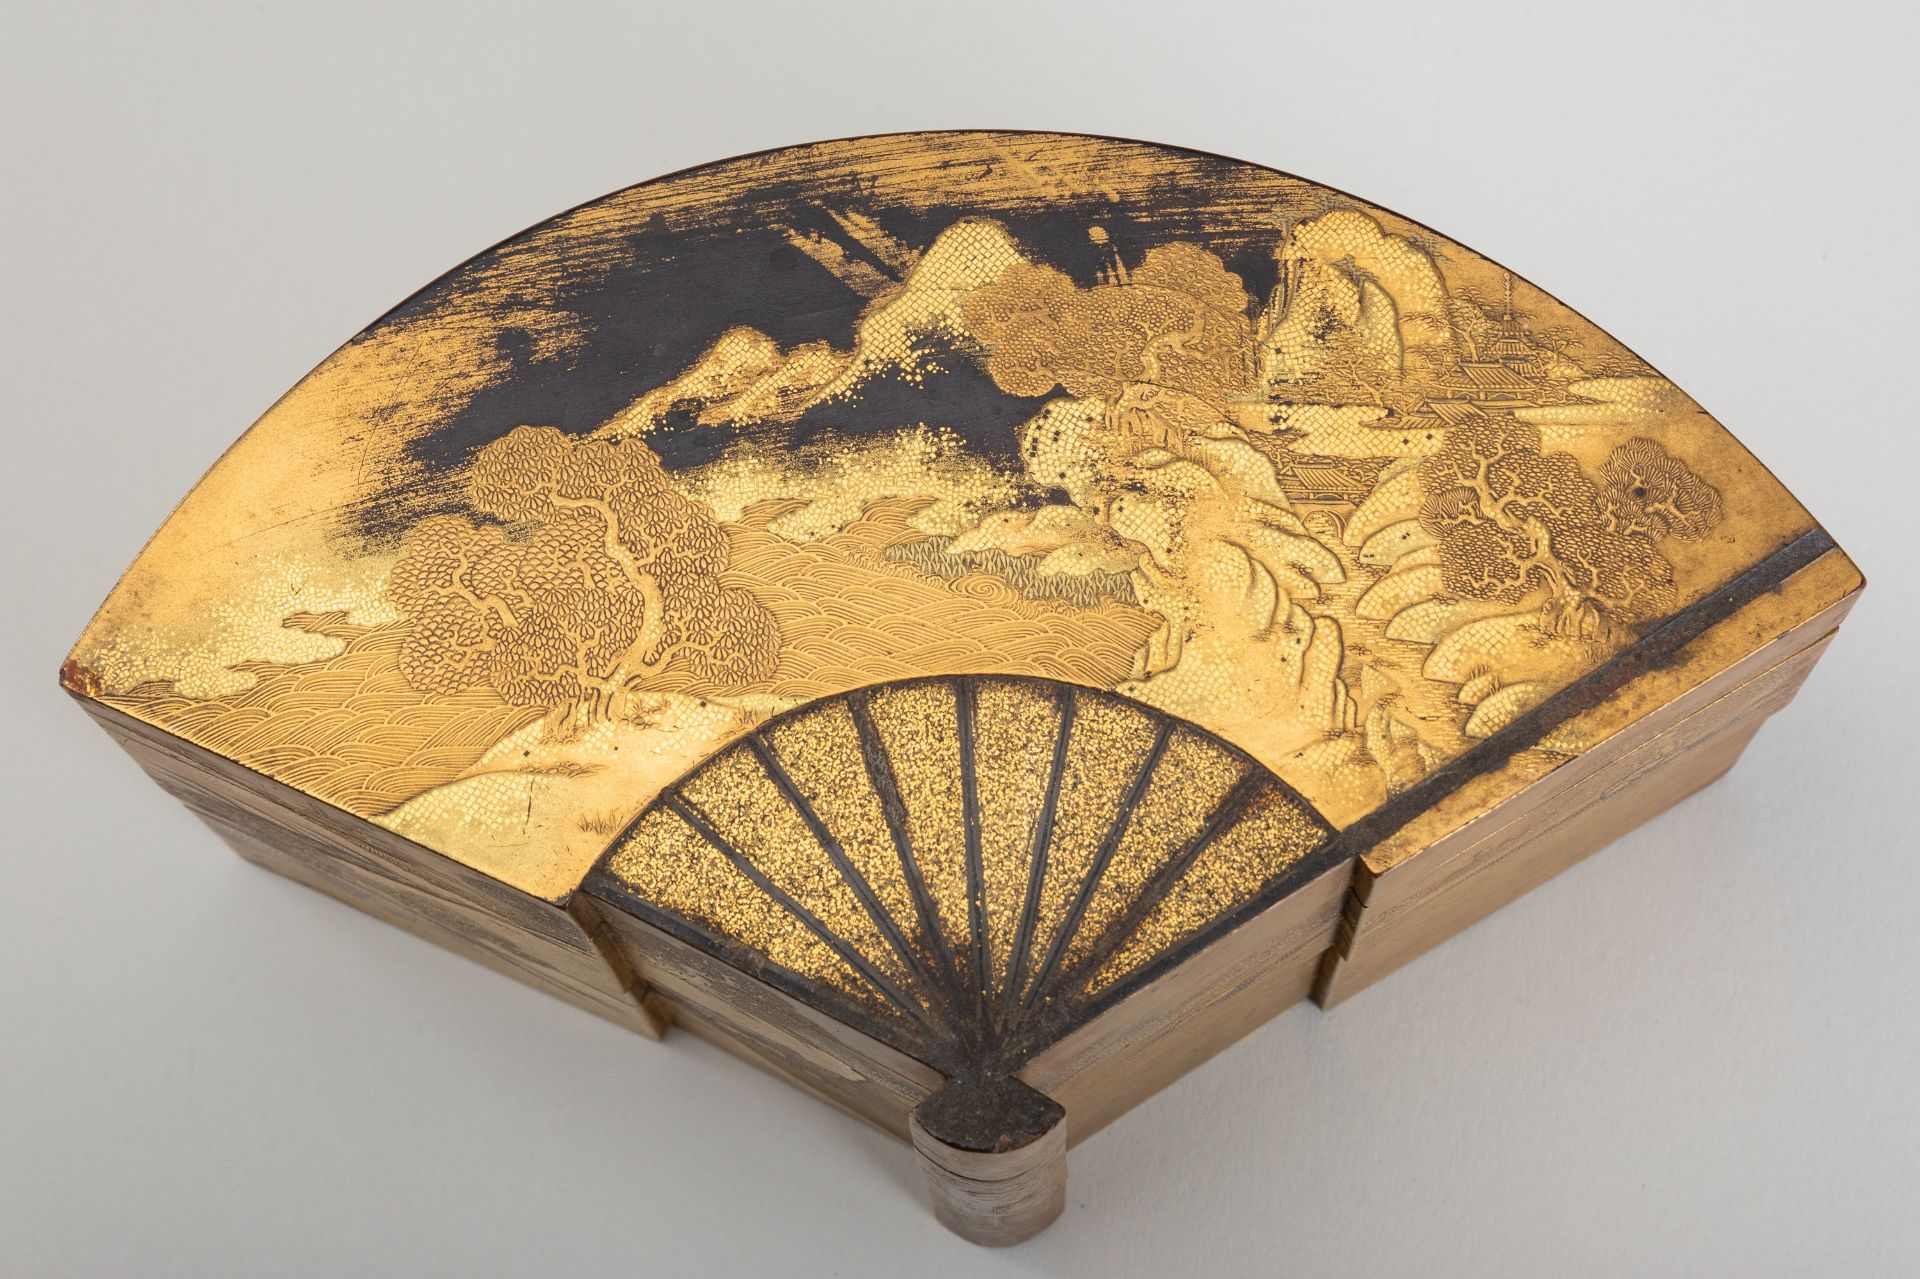 A FINE GOLD LACQUER FAN-SHAPED TWO-CASE BOX AND COVER WITH INTERIOR TRAY